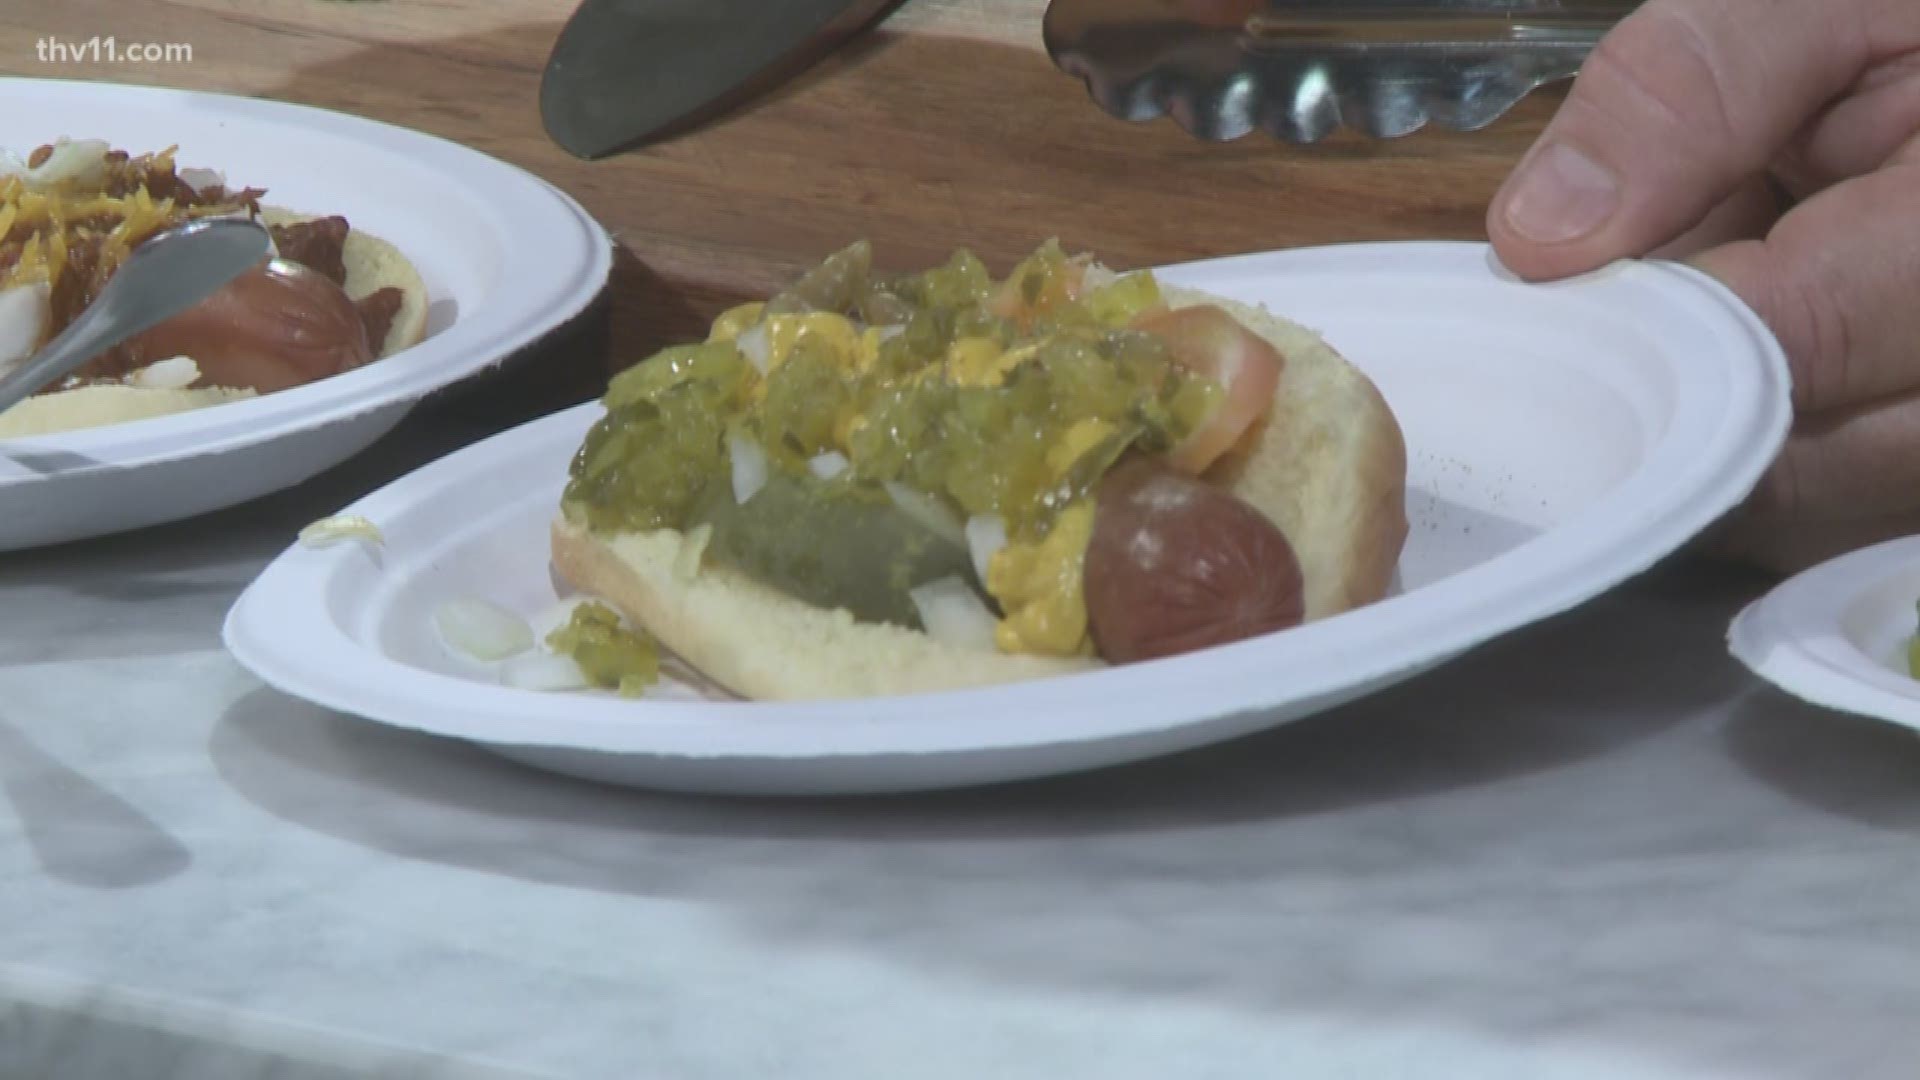 One of our favorite chefs is here to show us last-minute ideas for the fourth of July. Anthony Michael from Cross Eyed Pig joined us to share some food ideas for the Fourth of July.